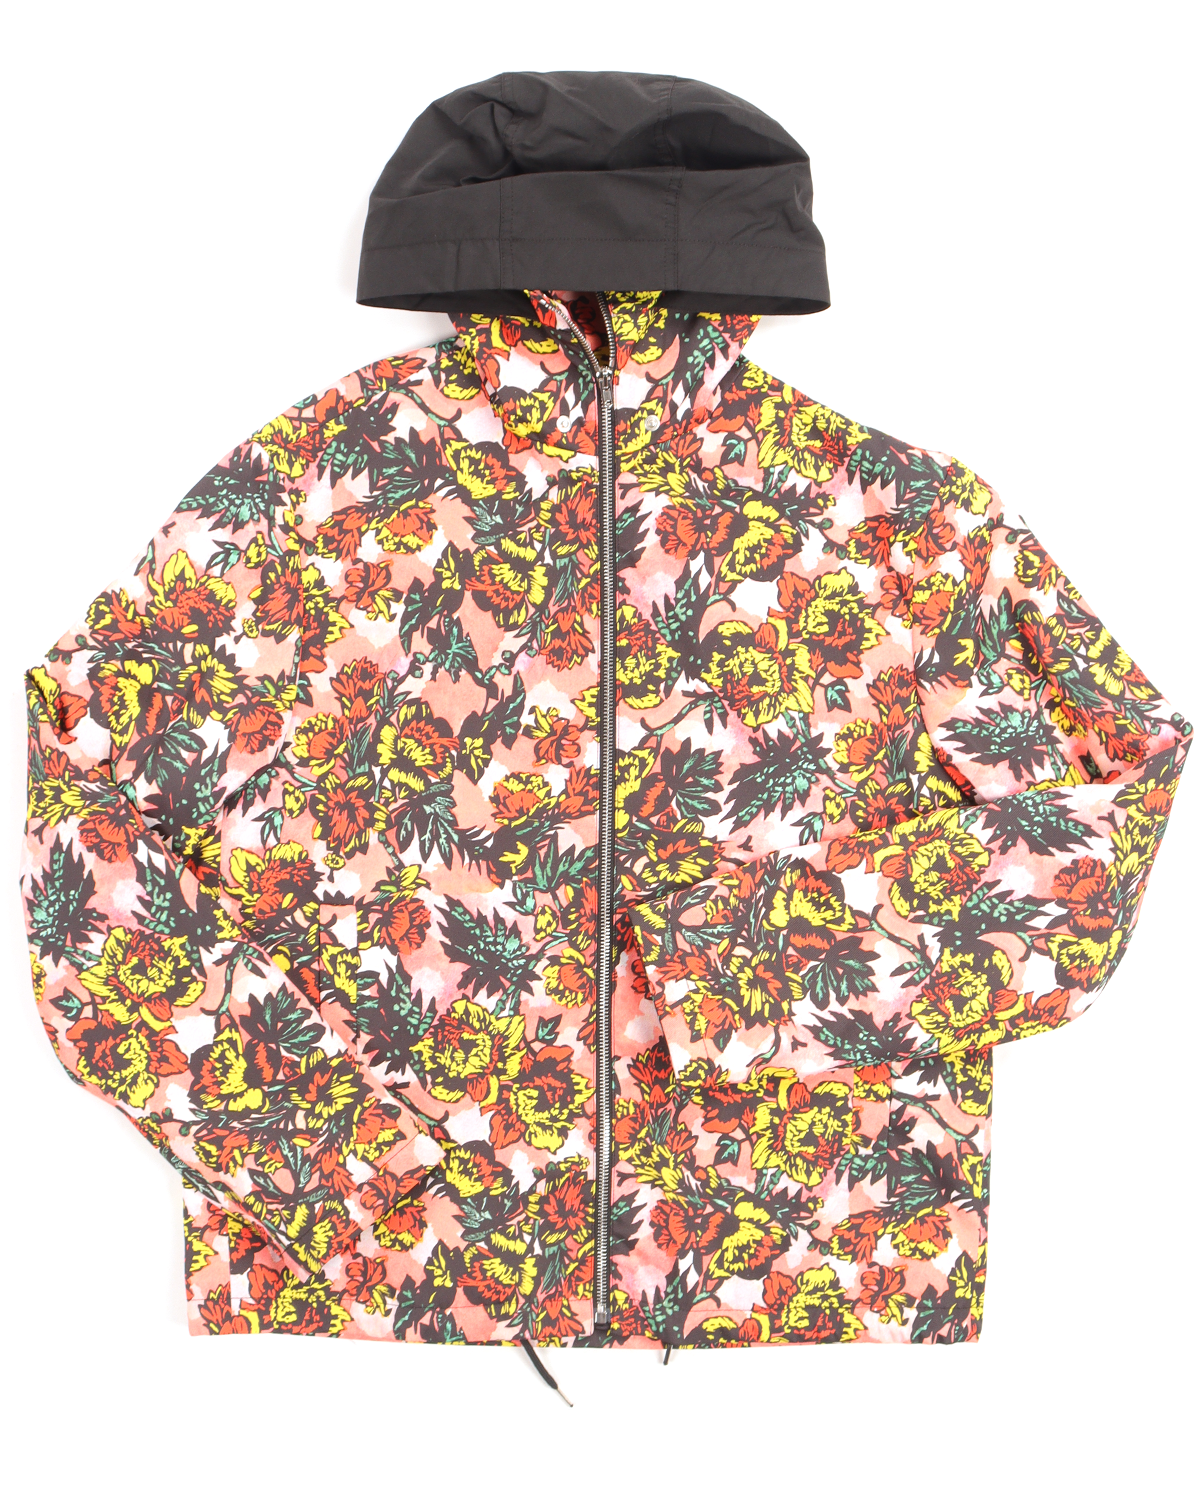 Floral Jacket w/ Tags